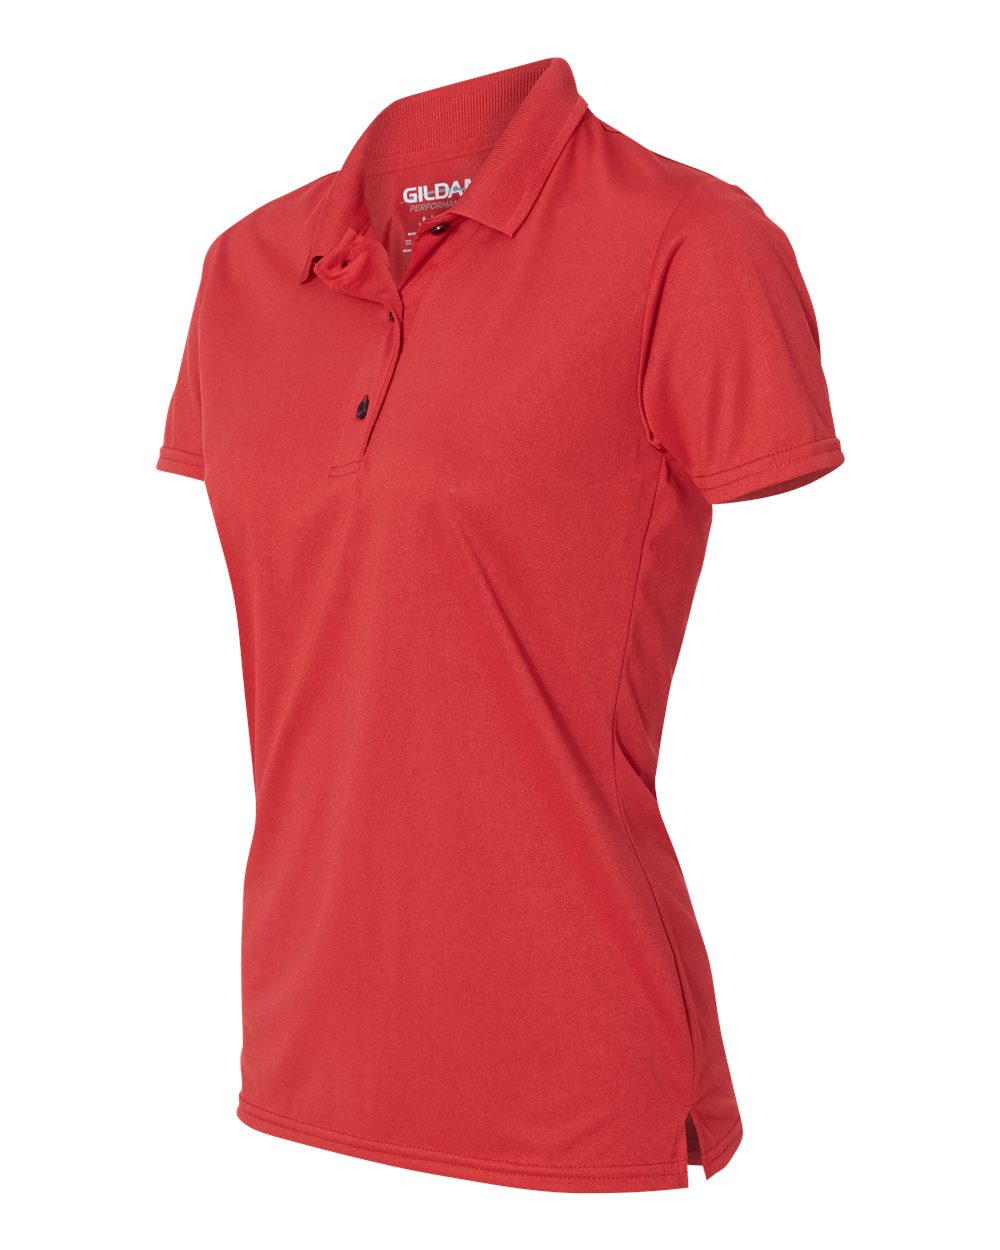 Gildan Performance® Women's Jersey Polo 44800L #color_Red